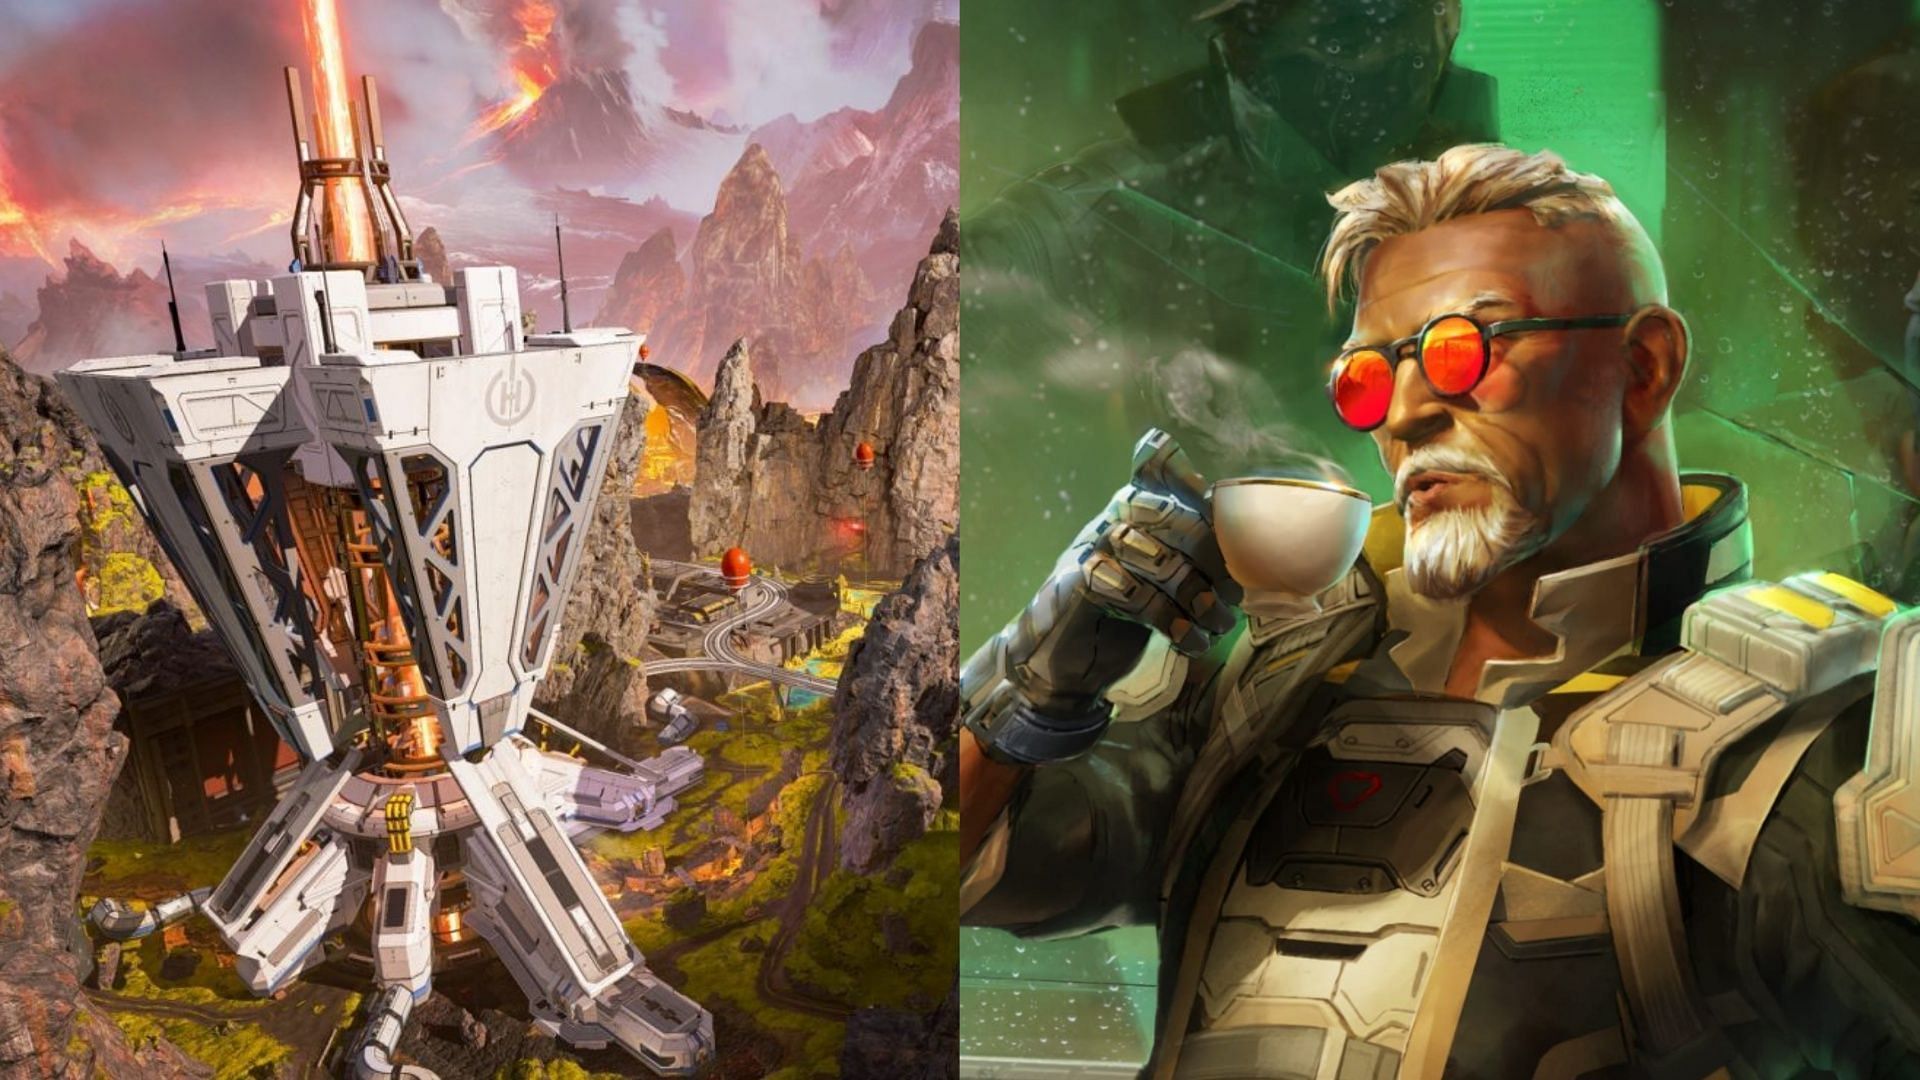 Apex Legends announces changes to ranked playlist, maps, and more for upcoming Season 17(Image via Respawn Entertainment/Edited by Sportskeeda)